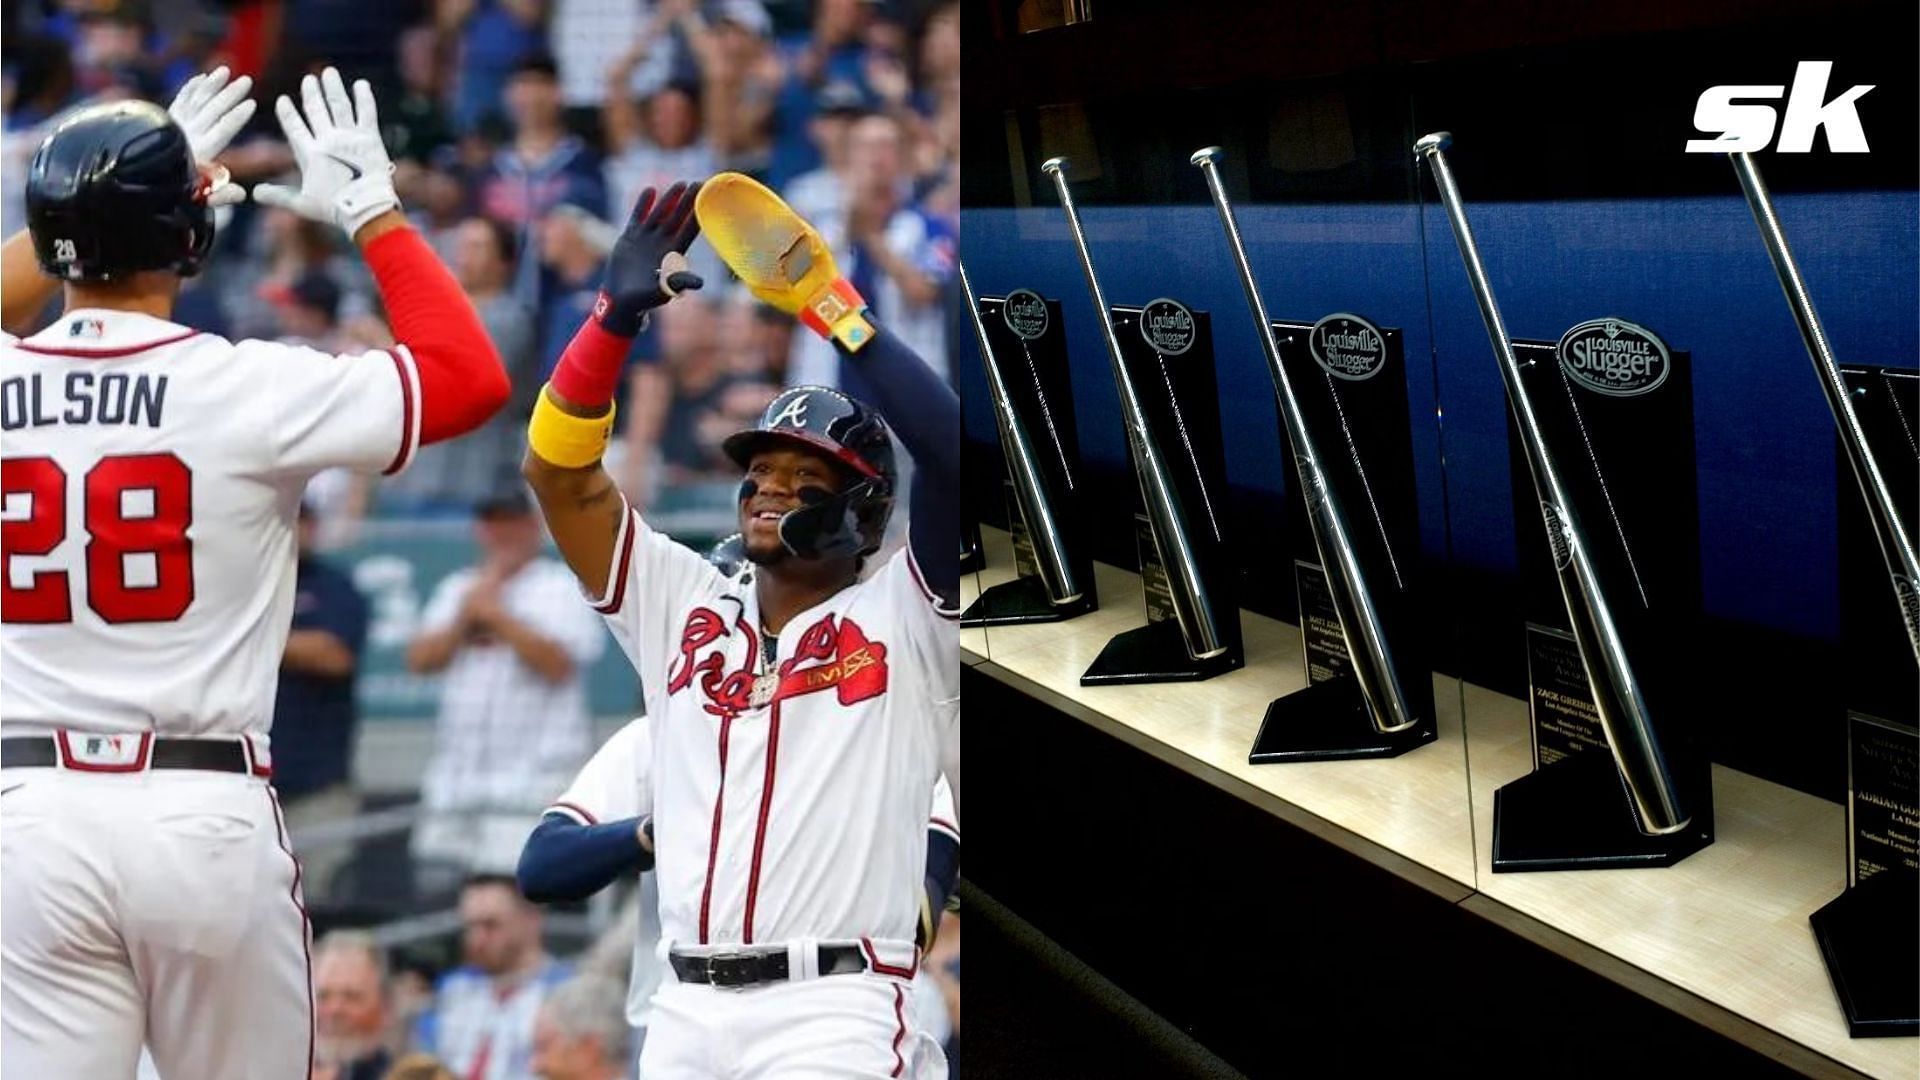 This year the MLB will hand out the first ever Team Silver Slugger Award for the top offensive teams in the AL and NL